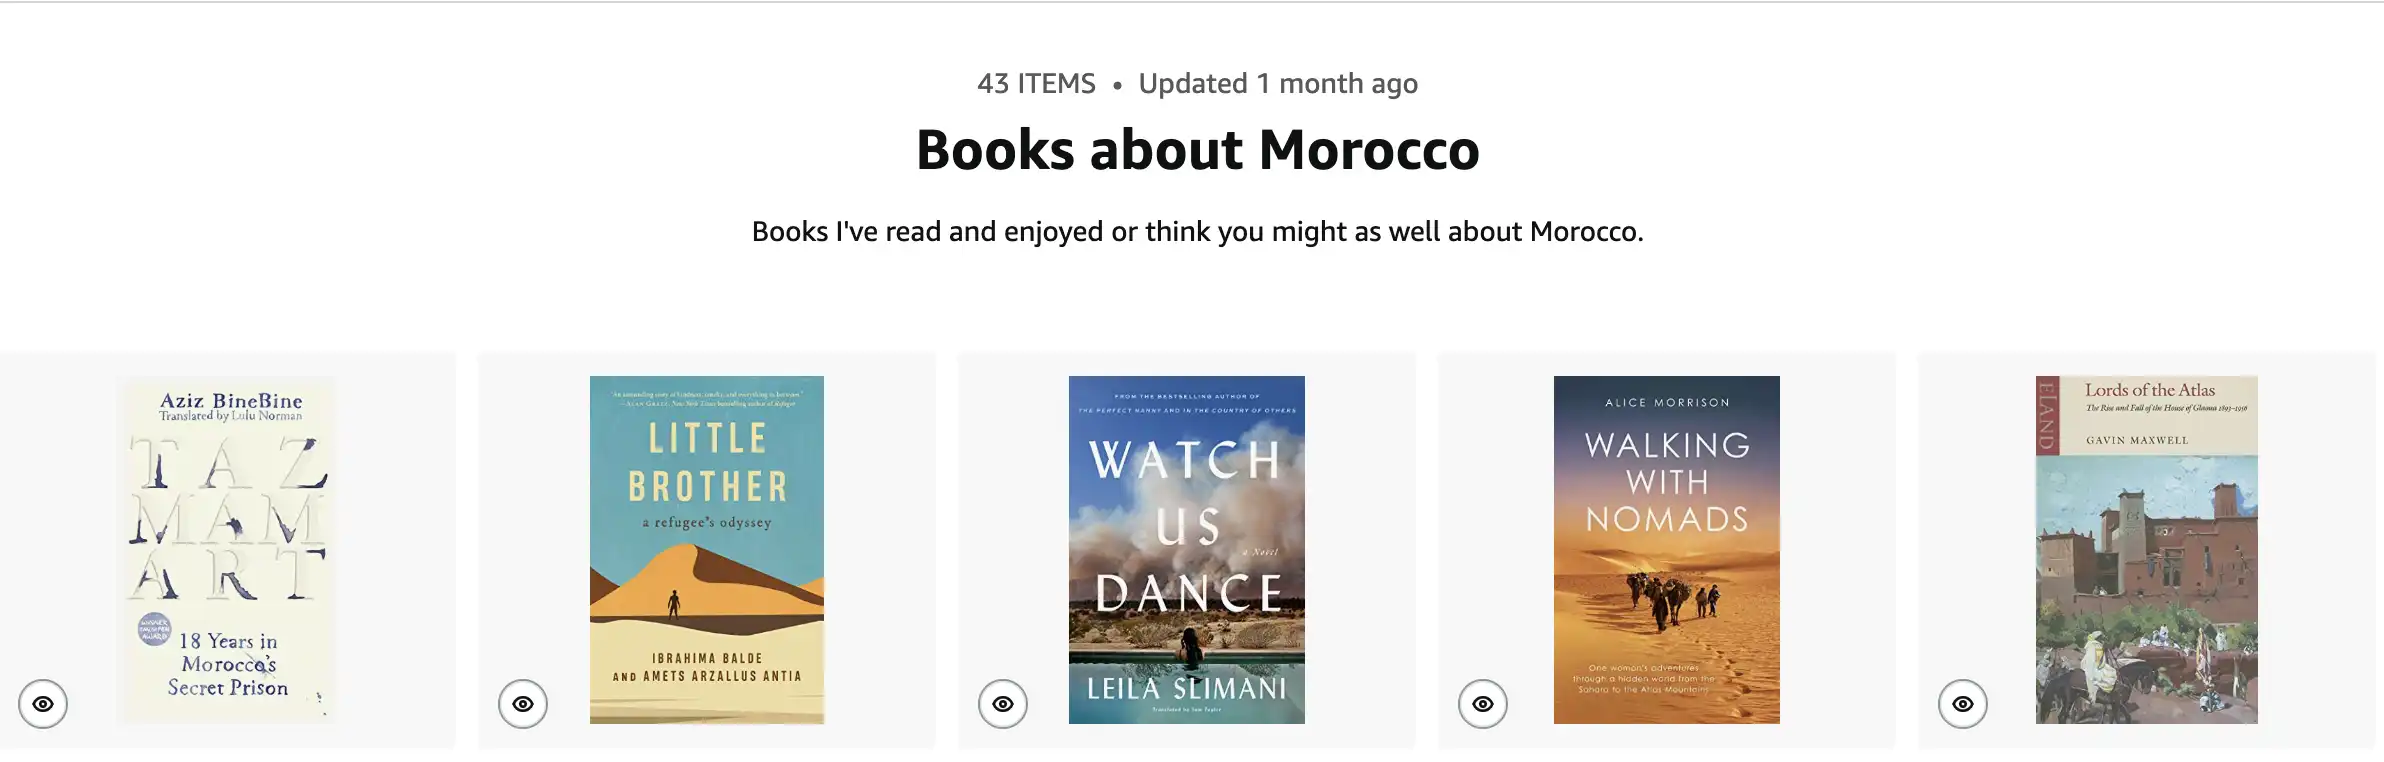 Books about Morocco